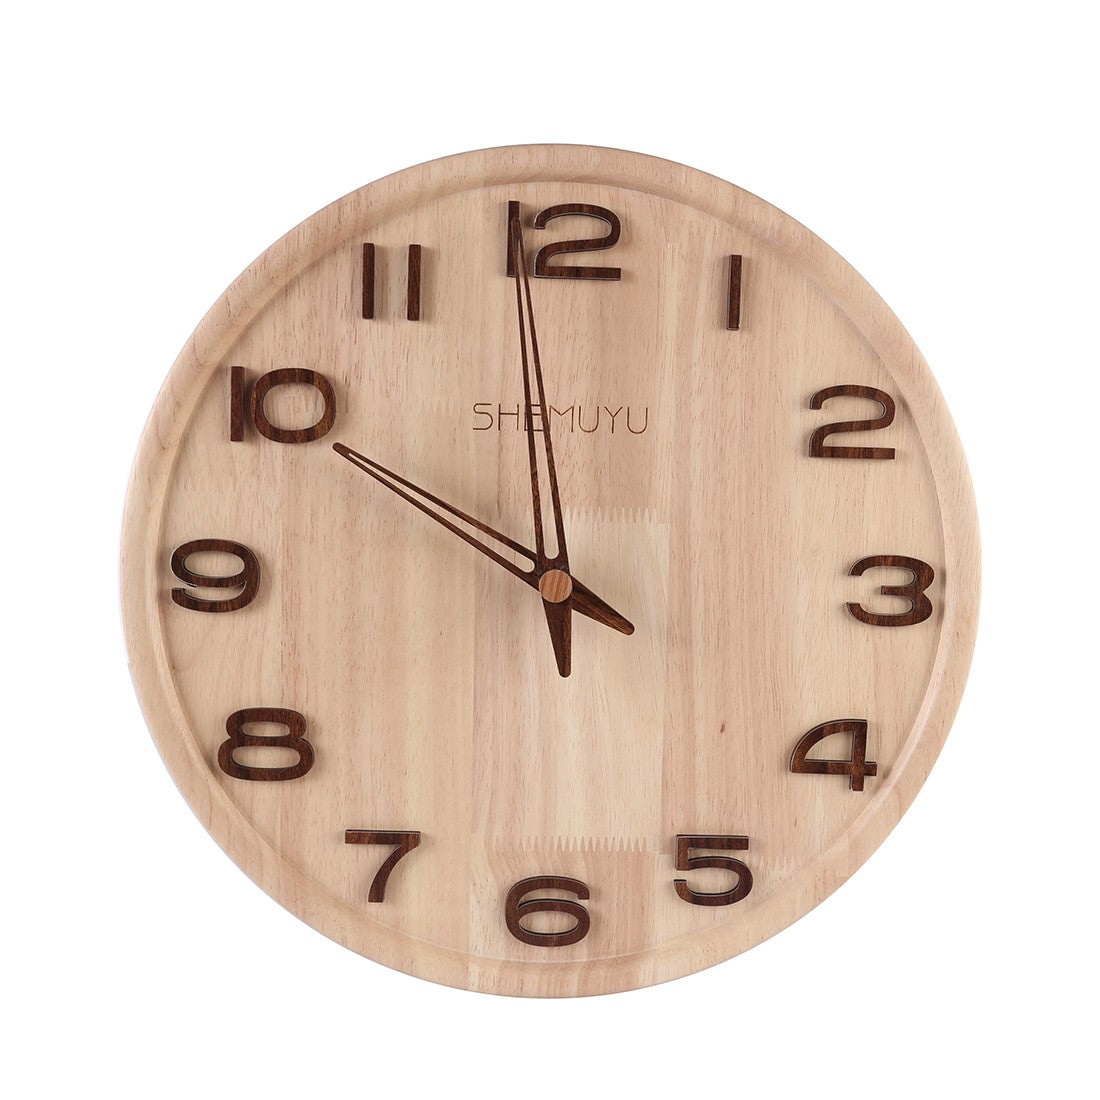 14 Inches Round Log Numbers Type Nordic Mute Wall Clock Creative Solid Wood Clock Wall Decor - Burlywood